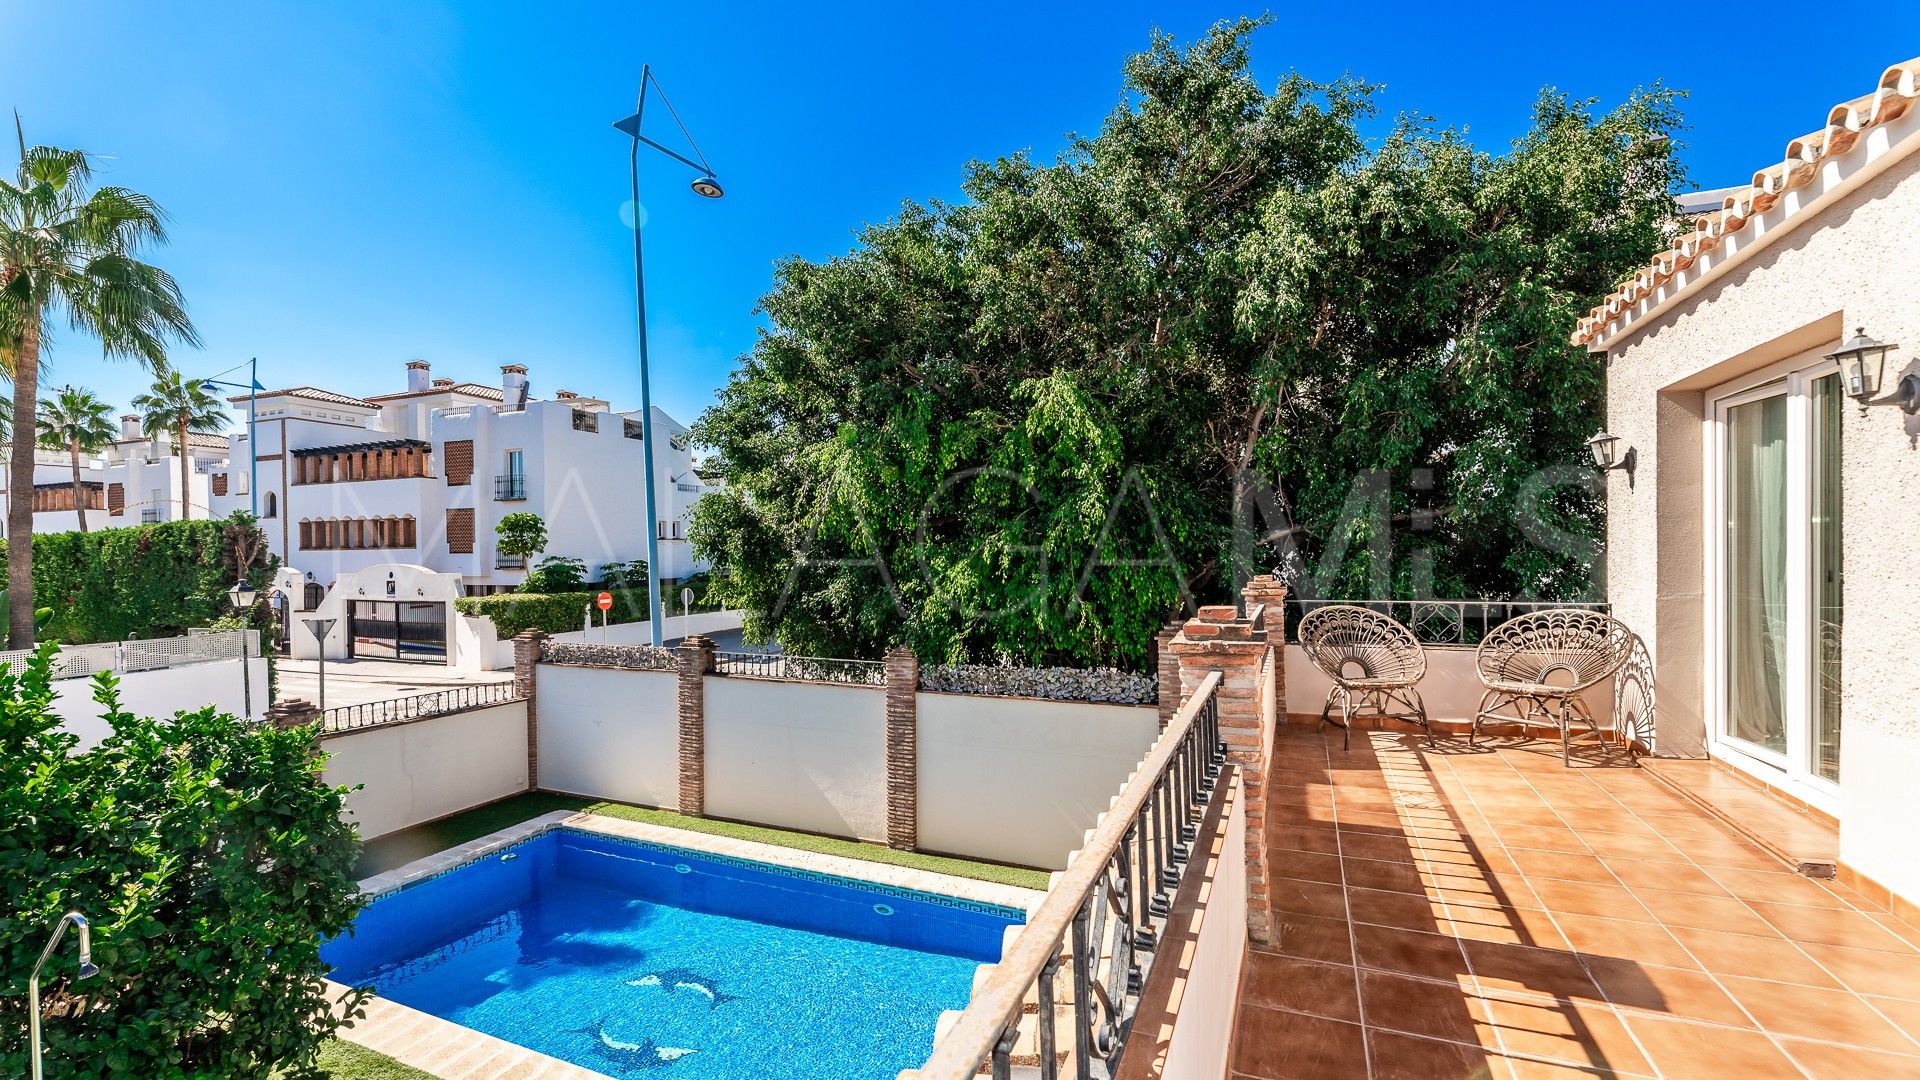 Villa for sale in San Pedro Playa with 5 bedrooms